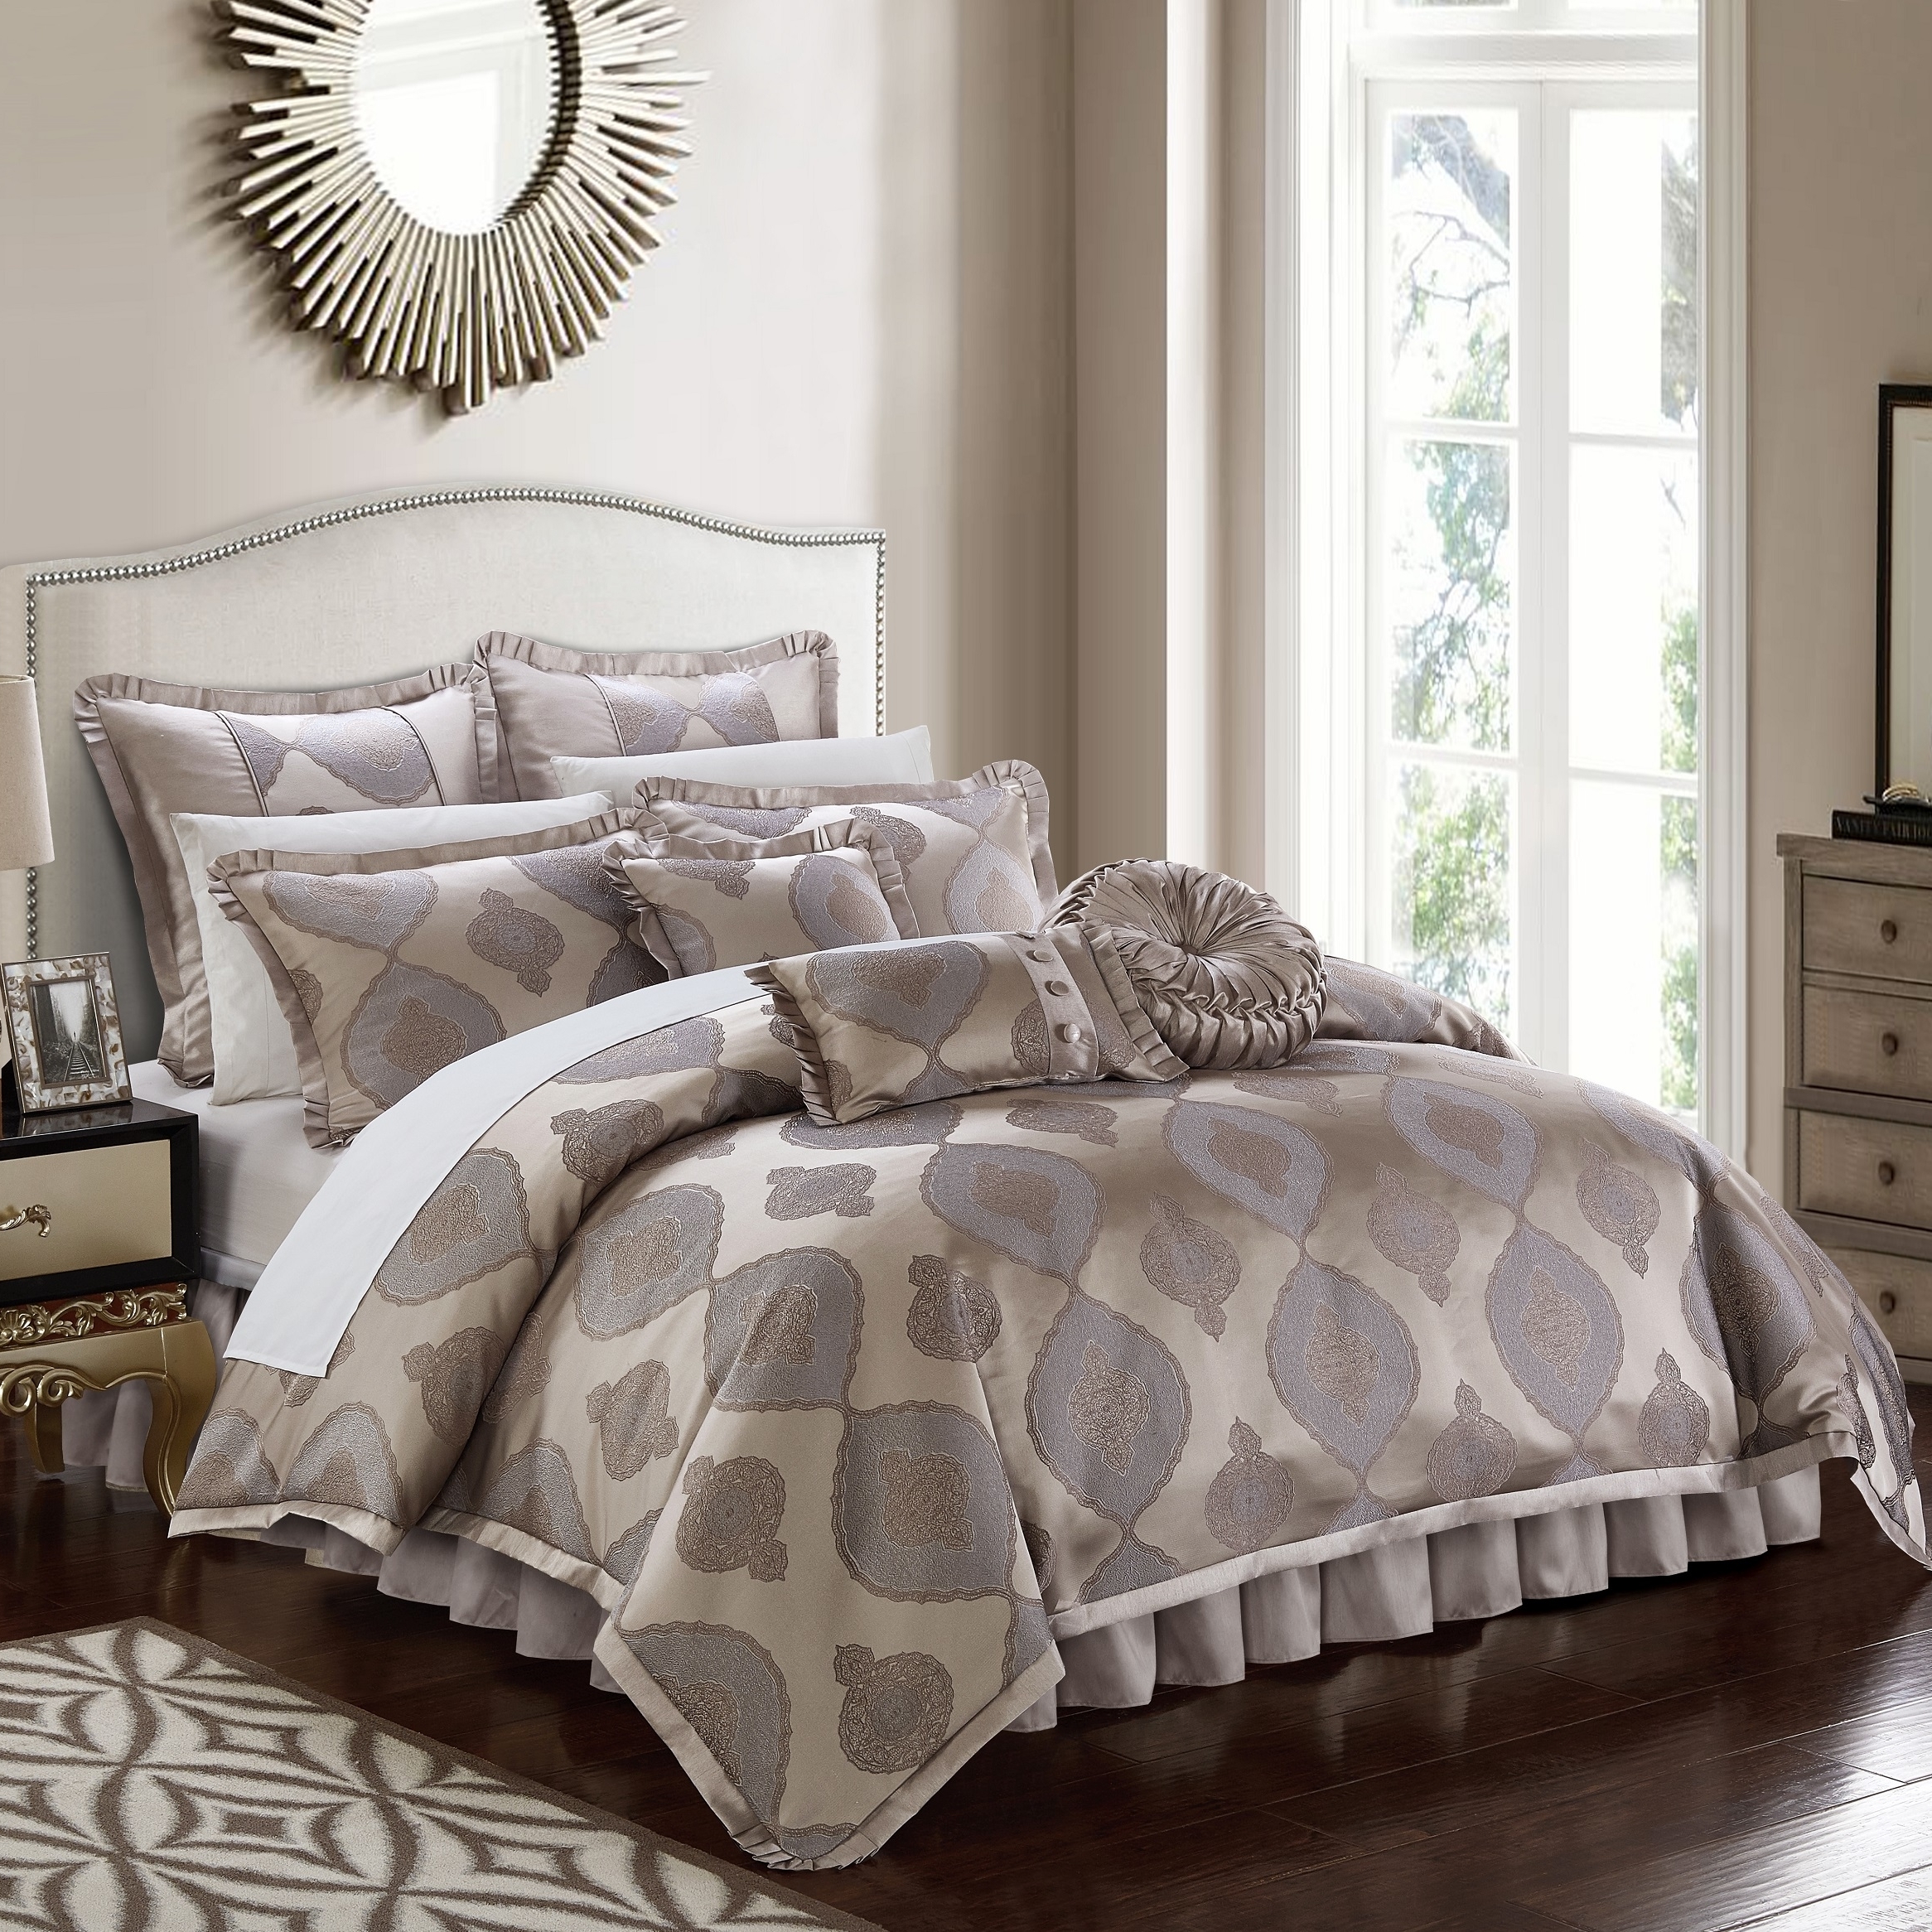 Sisa 9 Piece Comforter Set Jacquard Scroll Faux Silk Bedding With Pleated Flange - Taupe, Queen